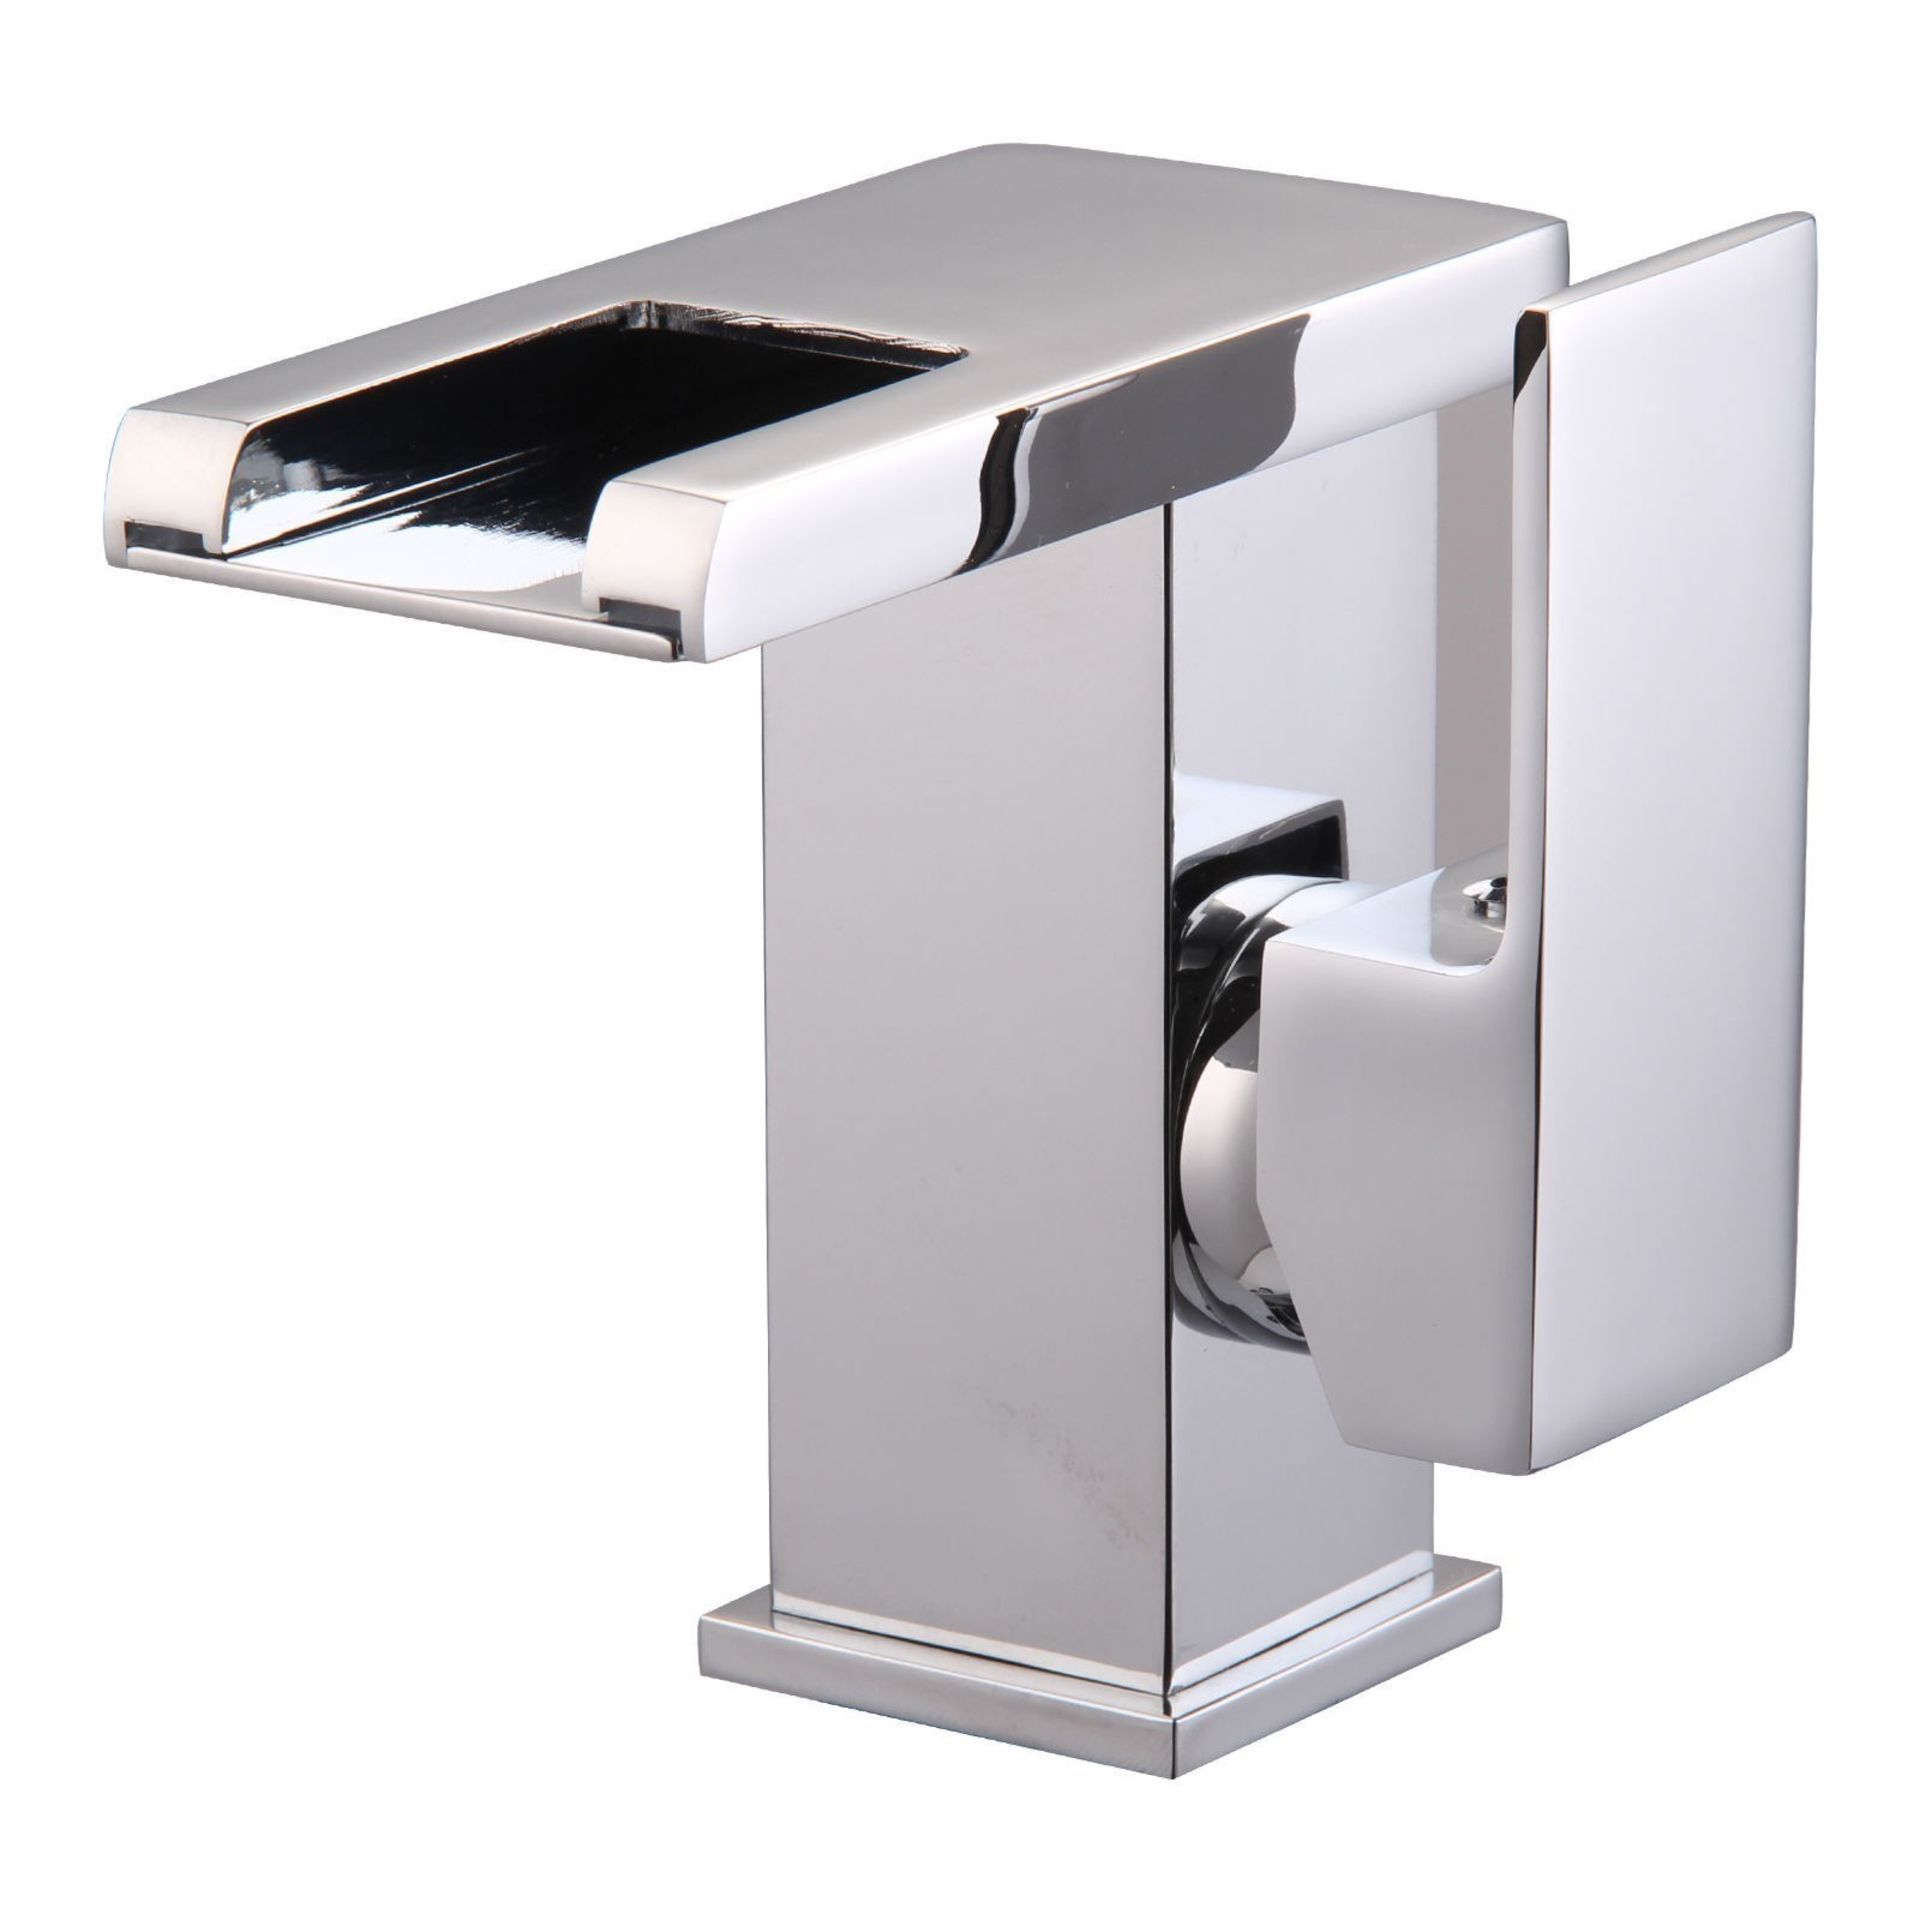 NEW & BOXED LED Waterfall Bathroom Basin MixerTap. RRP £229.99.Easy to install and clean. ... - Image 2 of 2